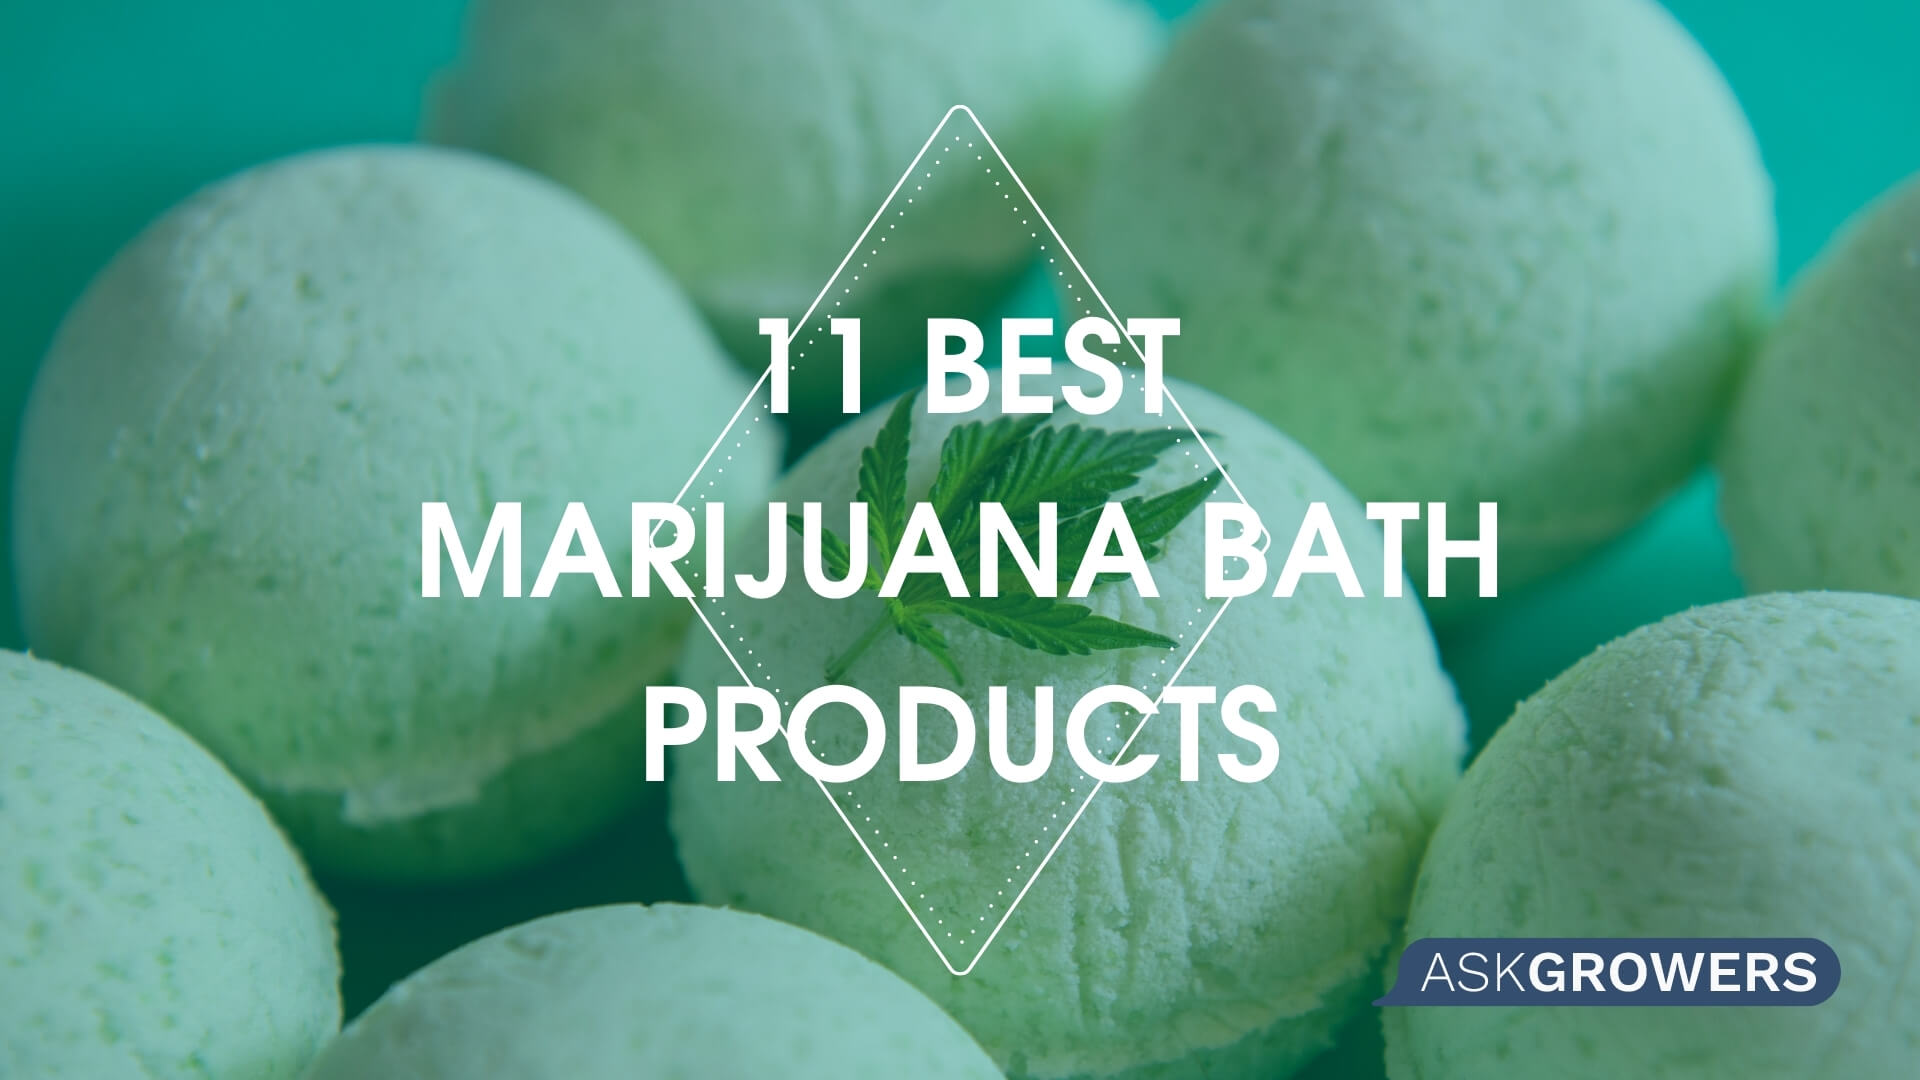 11 Best Marijuana Products For The Softest Bath